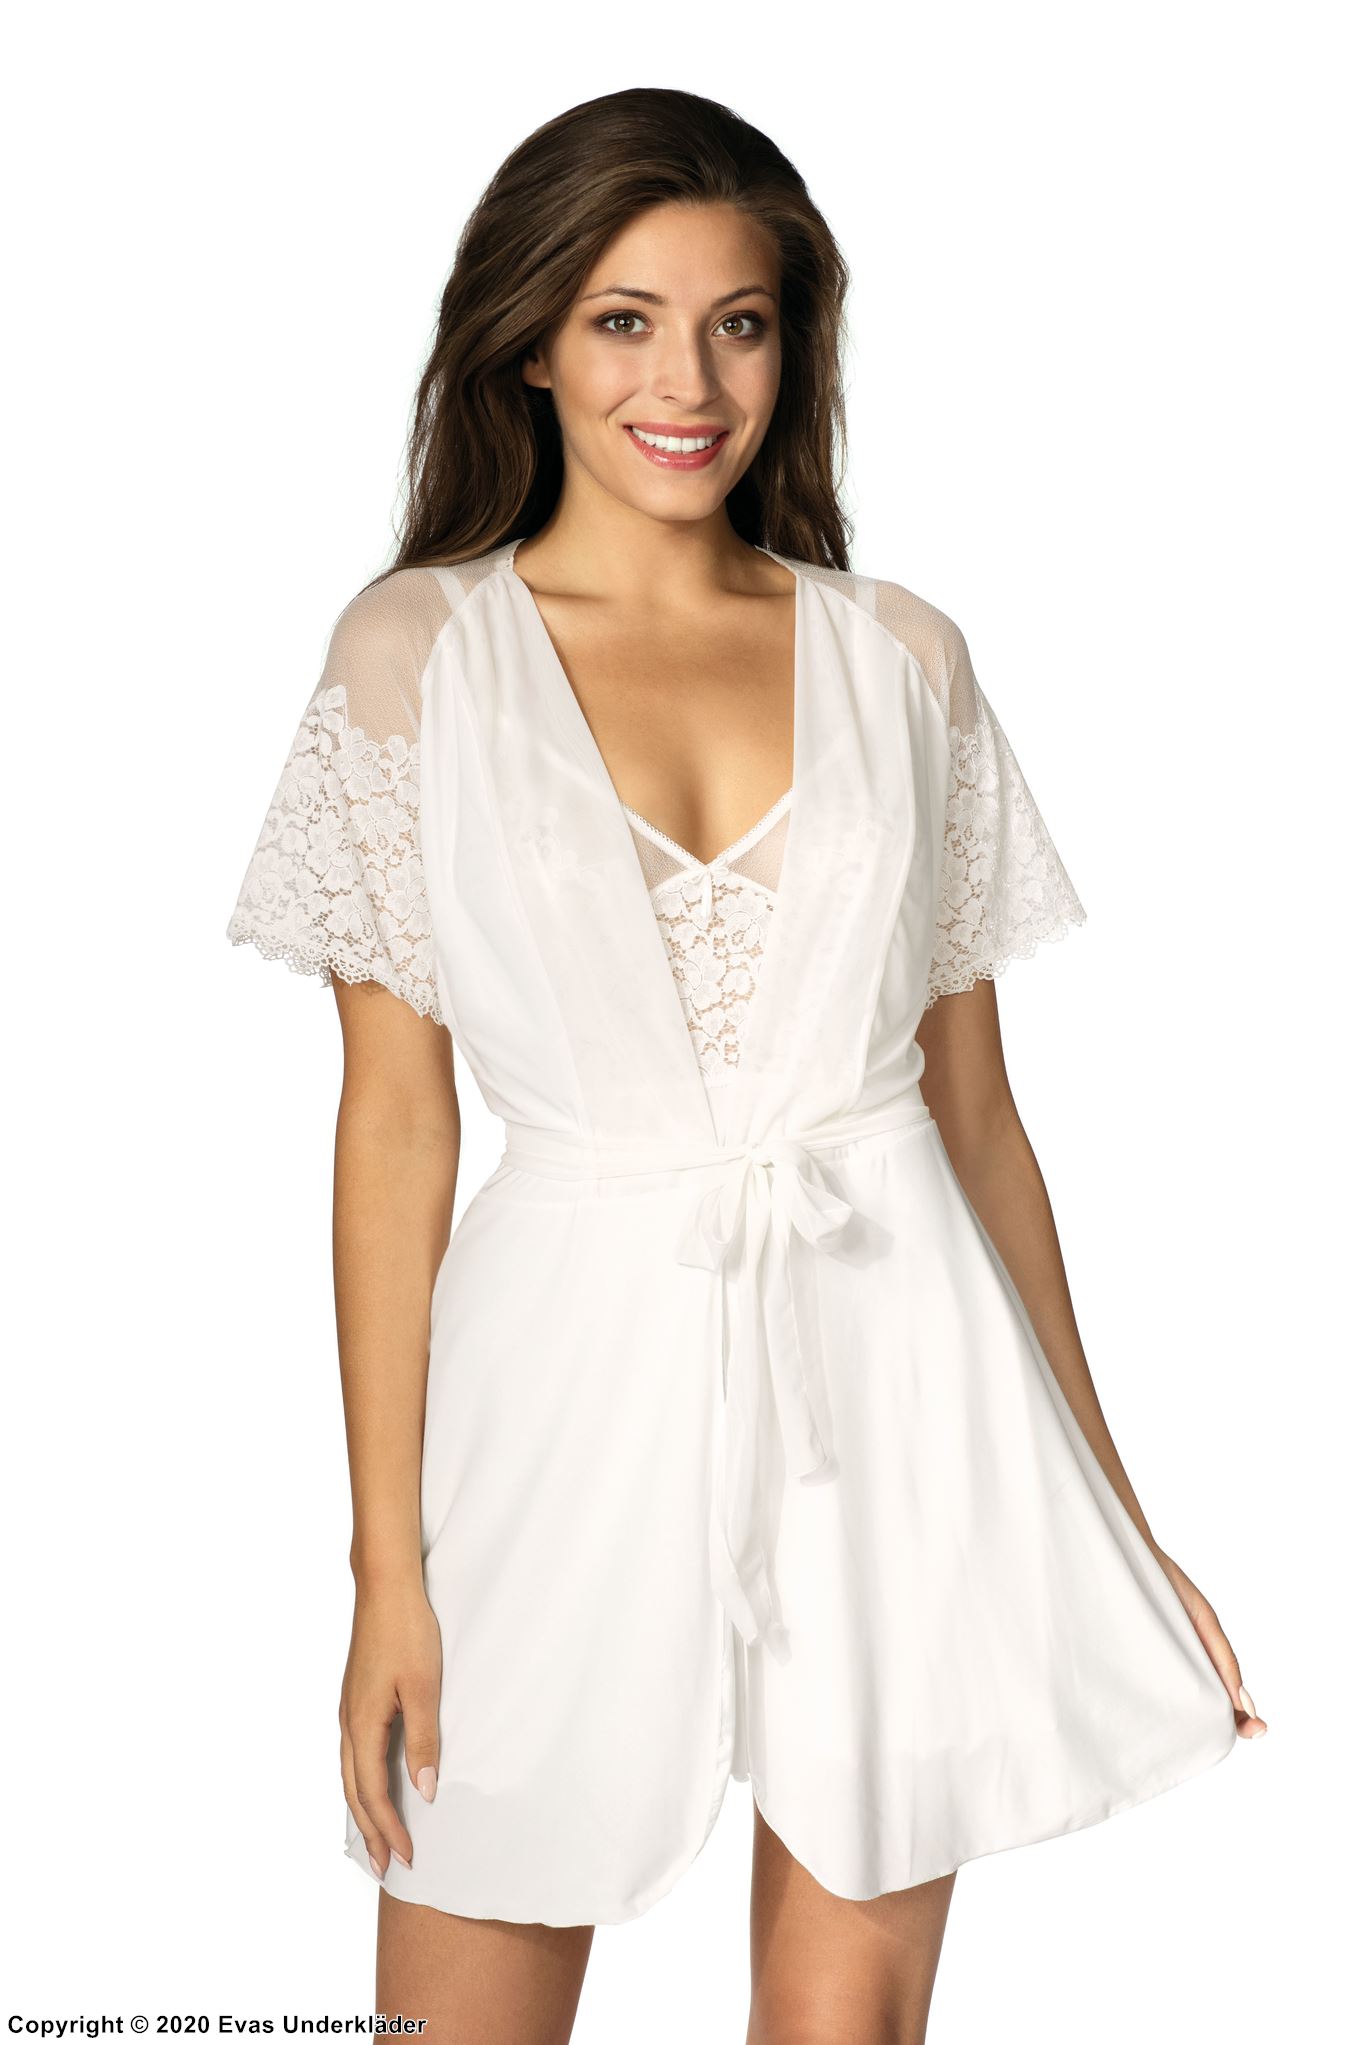 Lounge robe, bow, lace trim, short sleeves